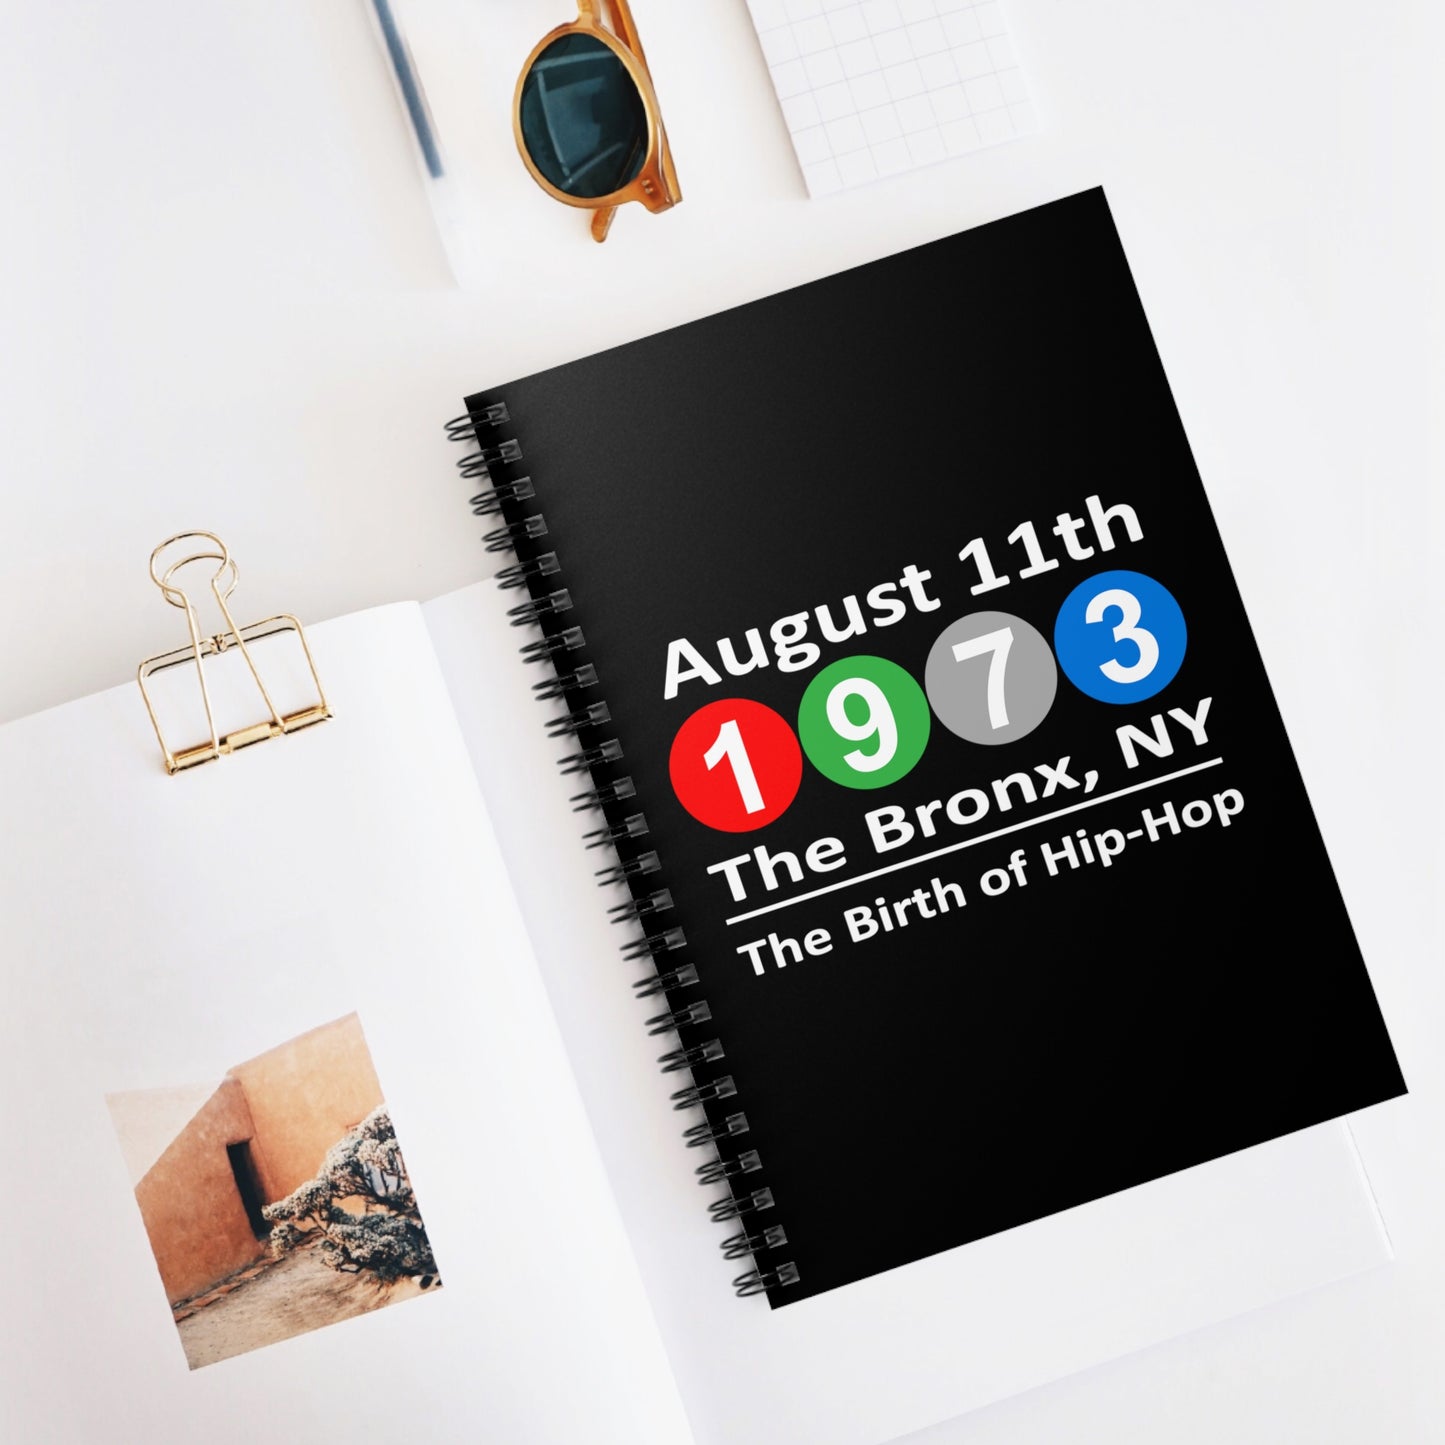 August 11th, 1973 The Bronx, NY The Birth of Hip-Hop Spiral Notebook Great gift for a Rapper or Songwriter